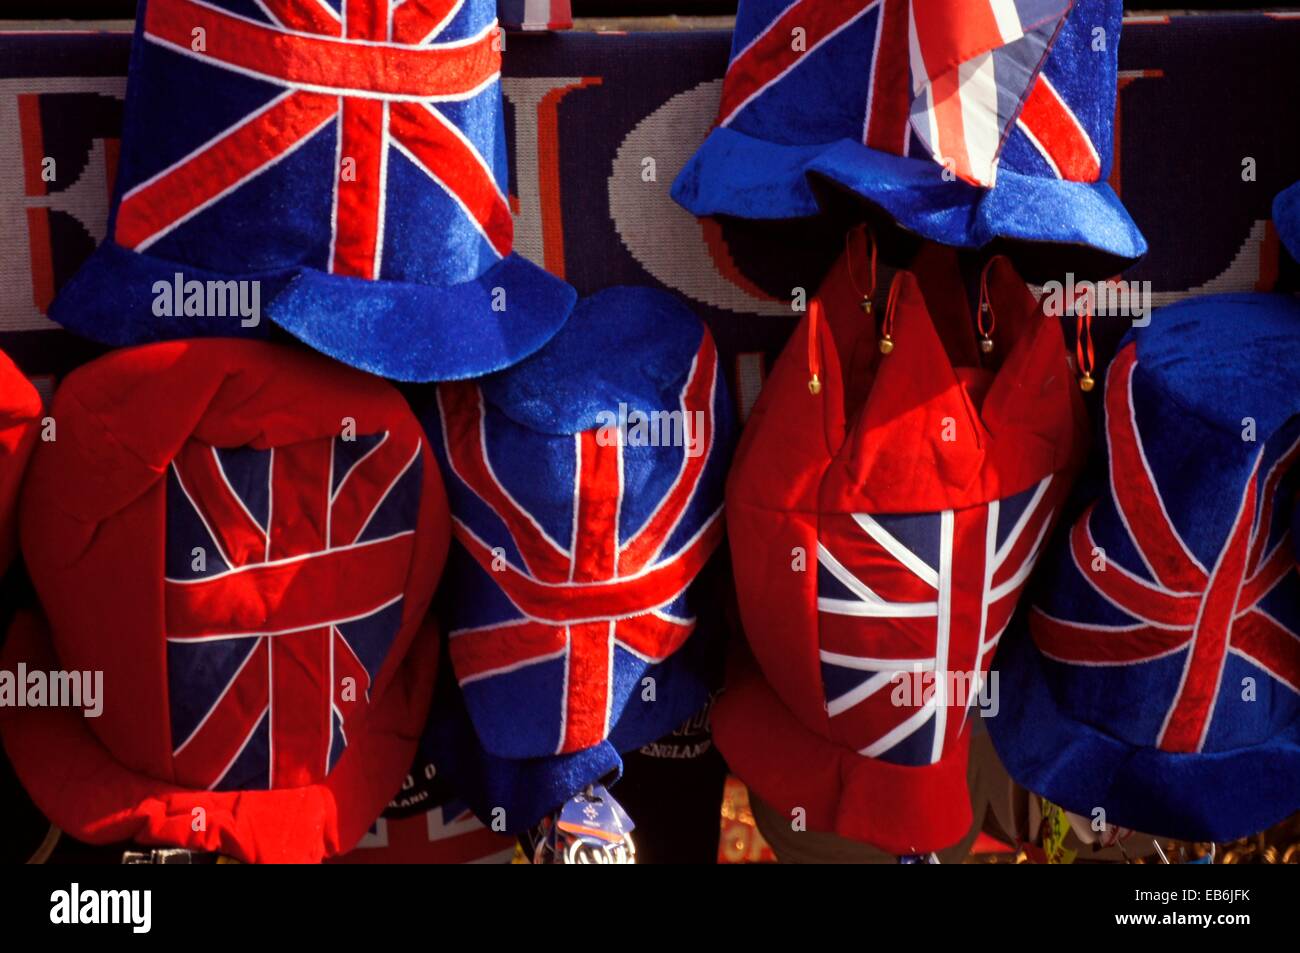 UK, London, souvenirs hats with the British Flag. Stock Photo